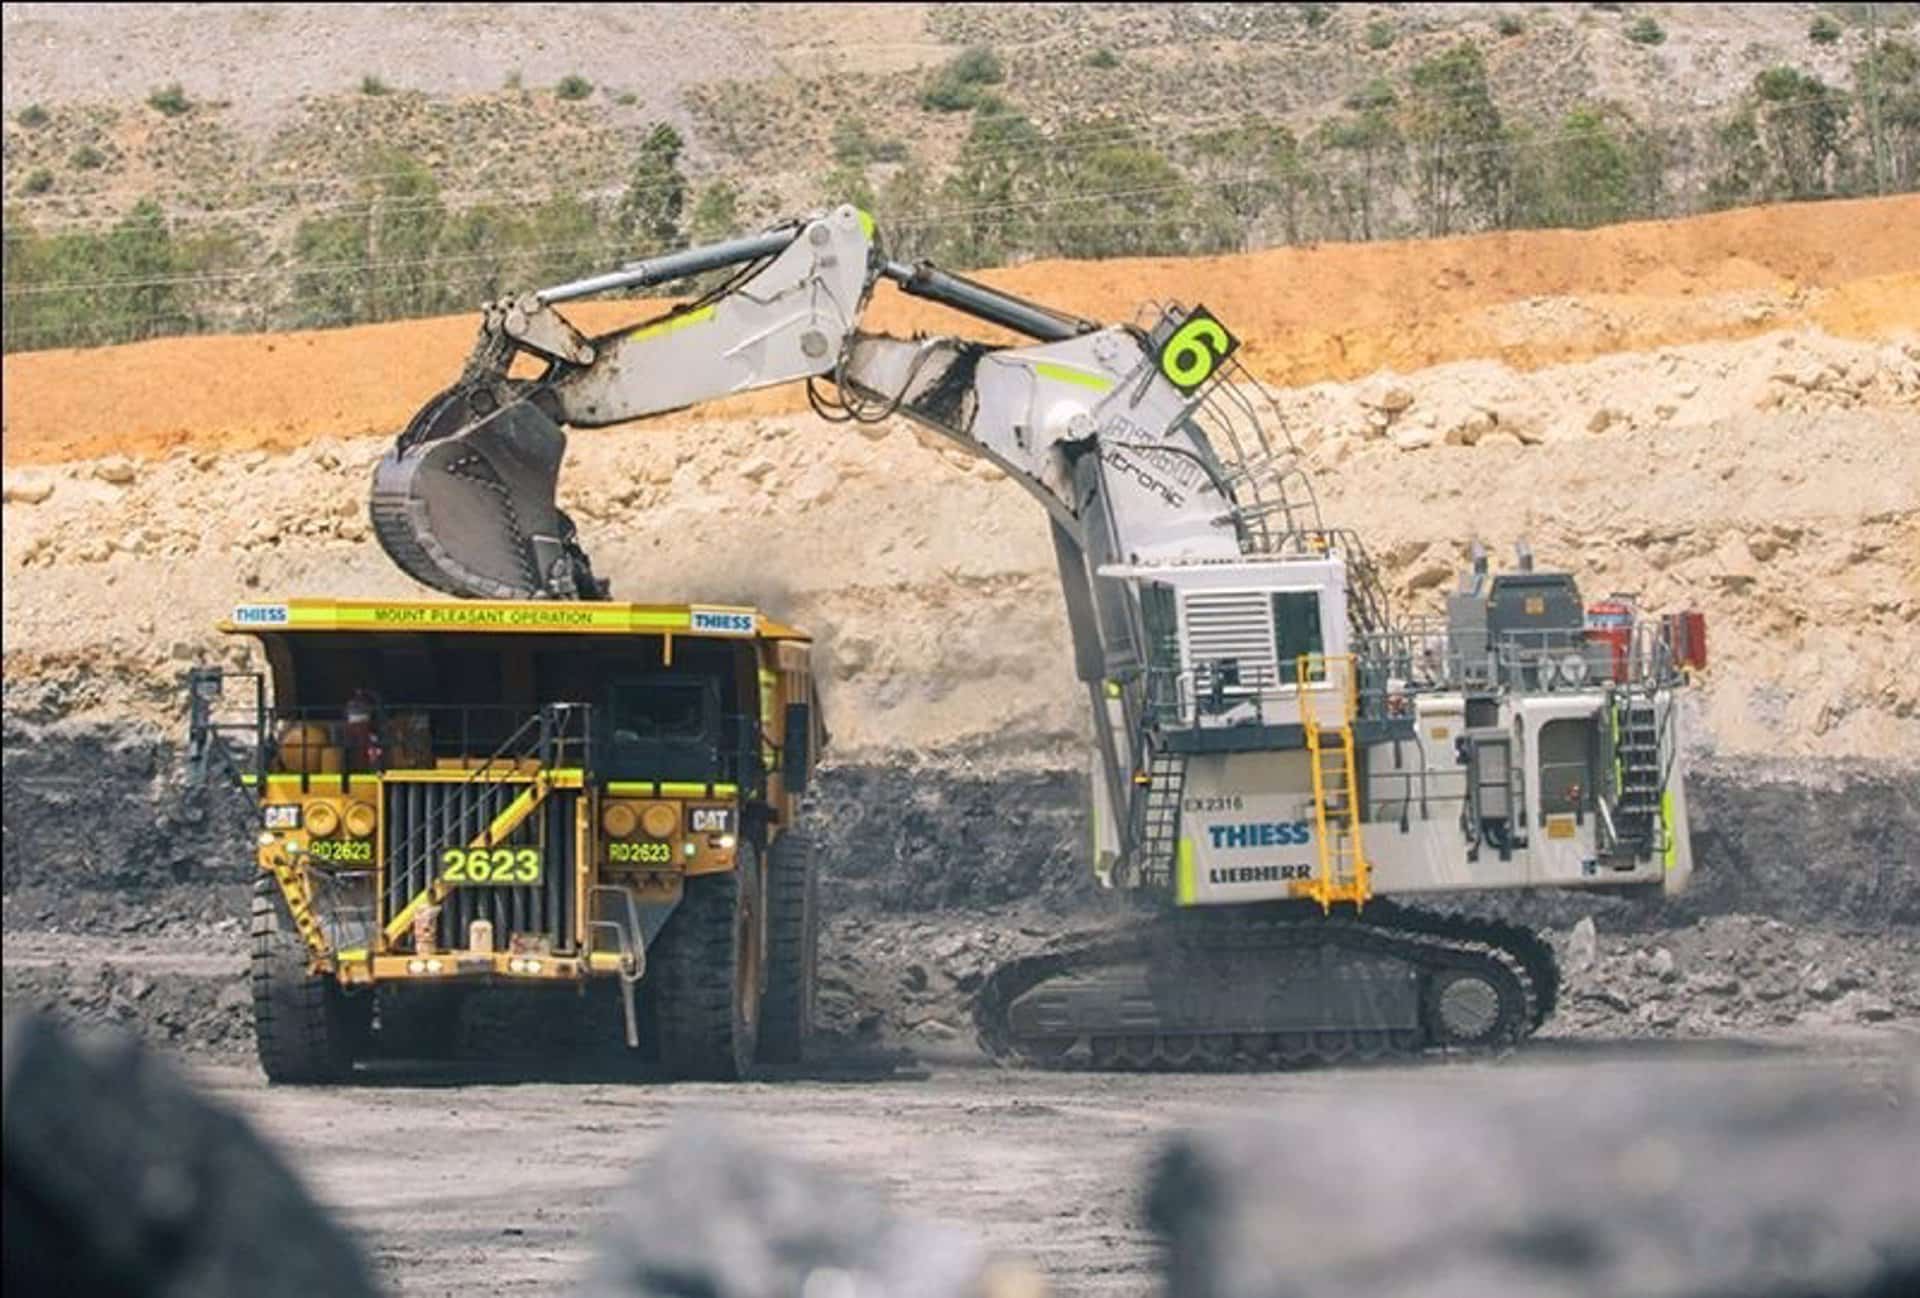 Cimic (ACS) wins two mining contracts in Australia worth €125 million